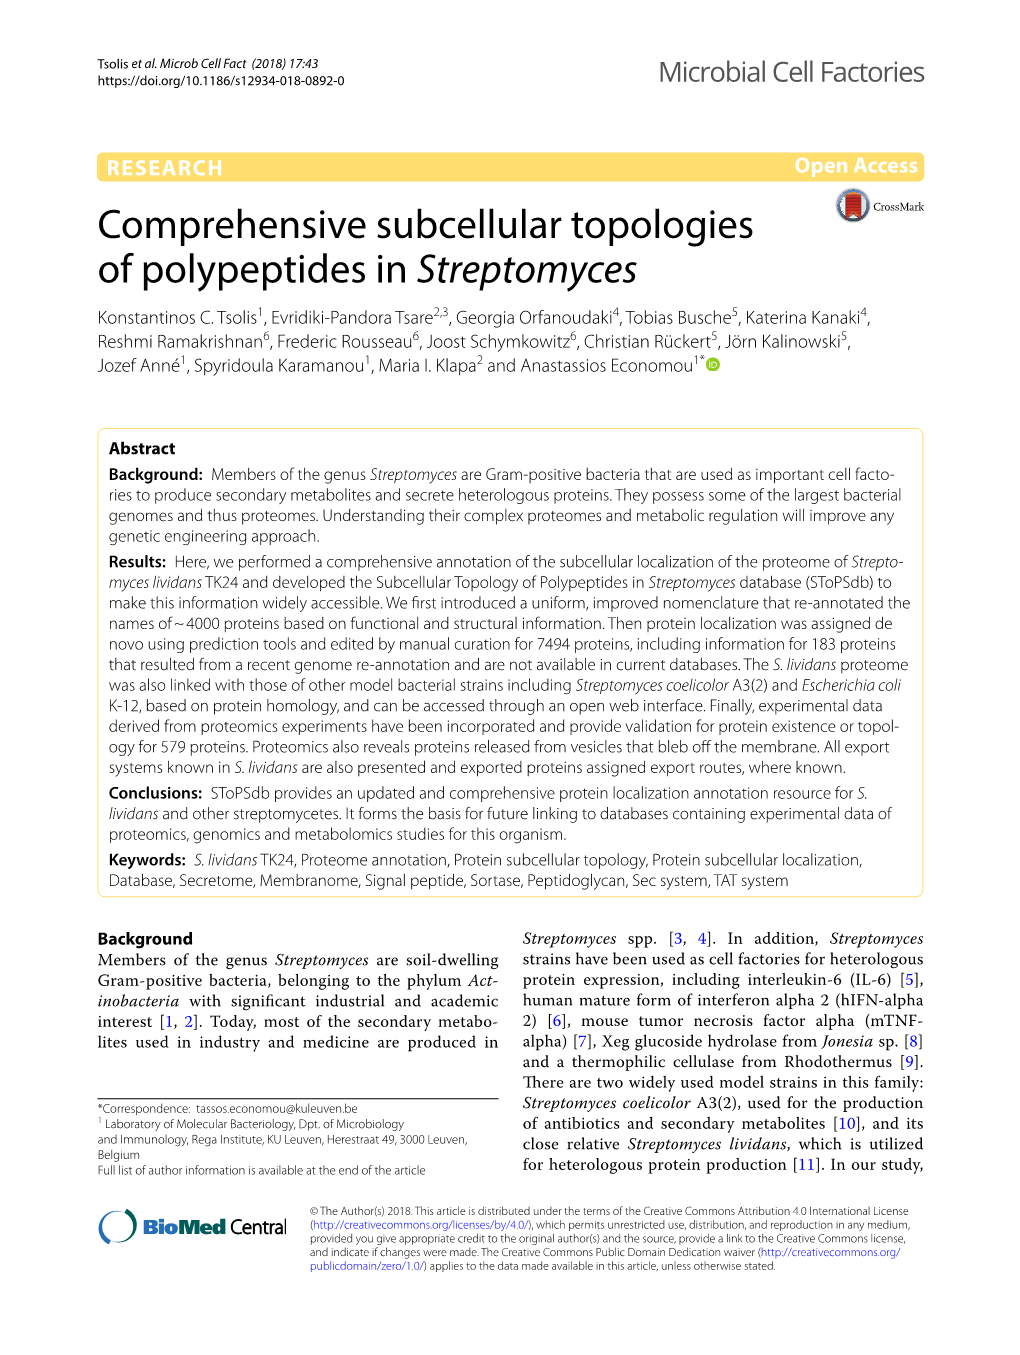 Comprehensive Subcellular Topologies of Polypeptides in Streptomyces Konstantinos C